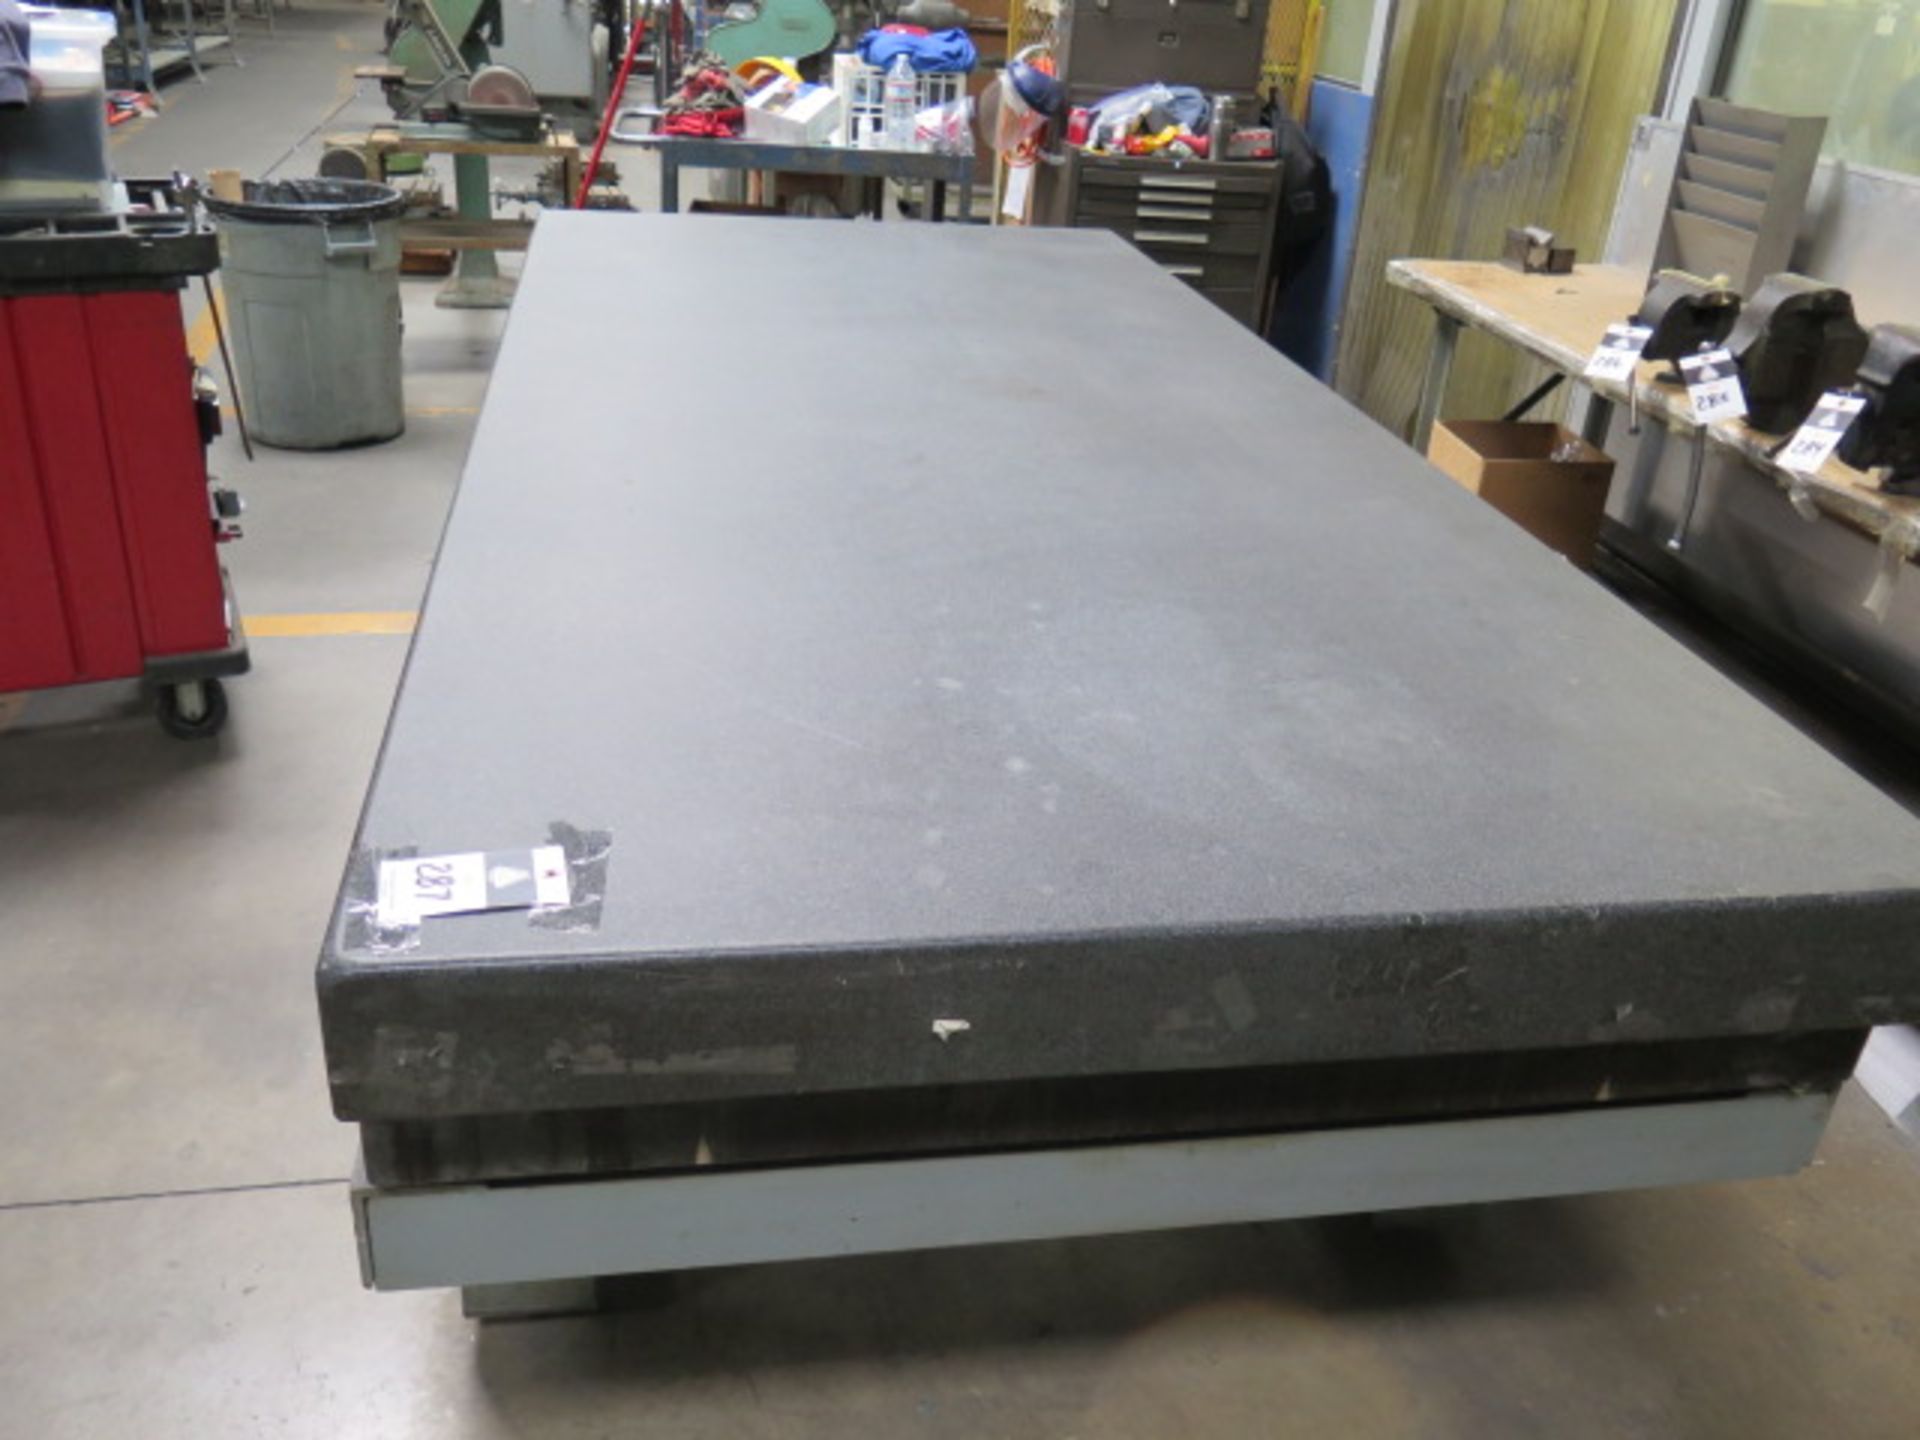 50 ½” x 110” x 10” 2-Ledge Granite Surface Plate w/ Stand (SOLD AS-IS - NO WARRANTY) - Image 3 of 8